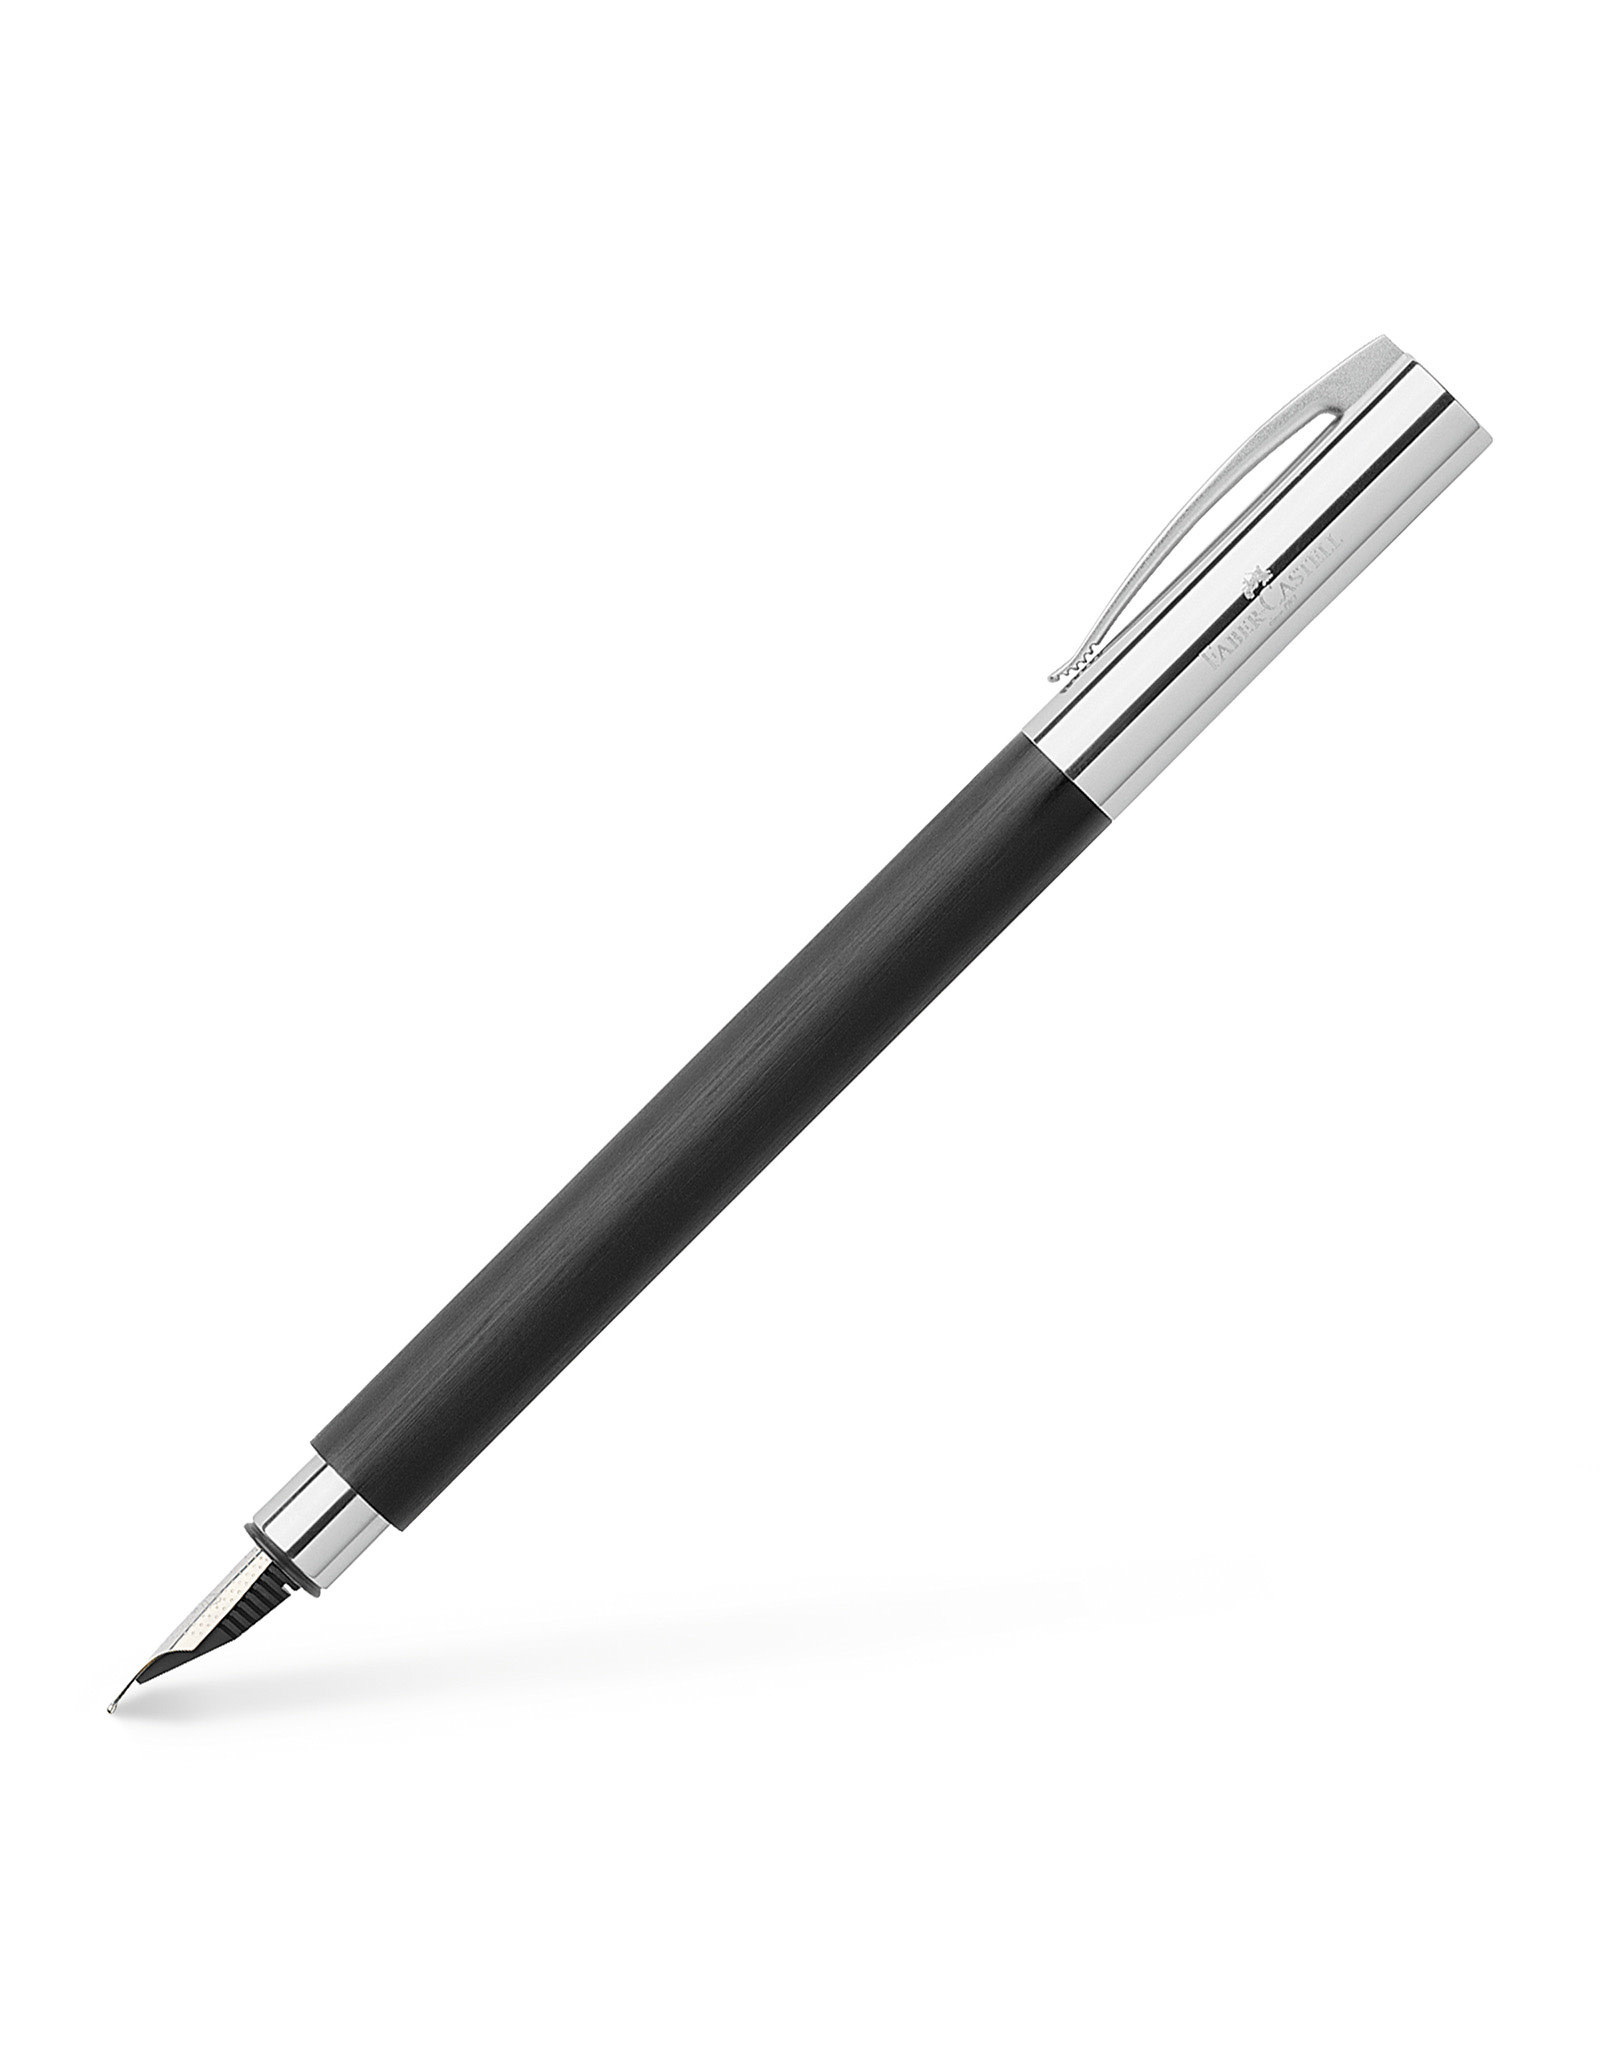 FABER-CASTELL Ambition Fountain Pen, Black Resin (M)